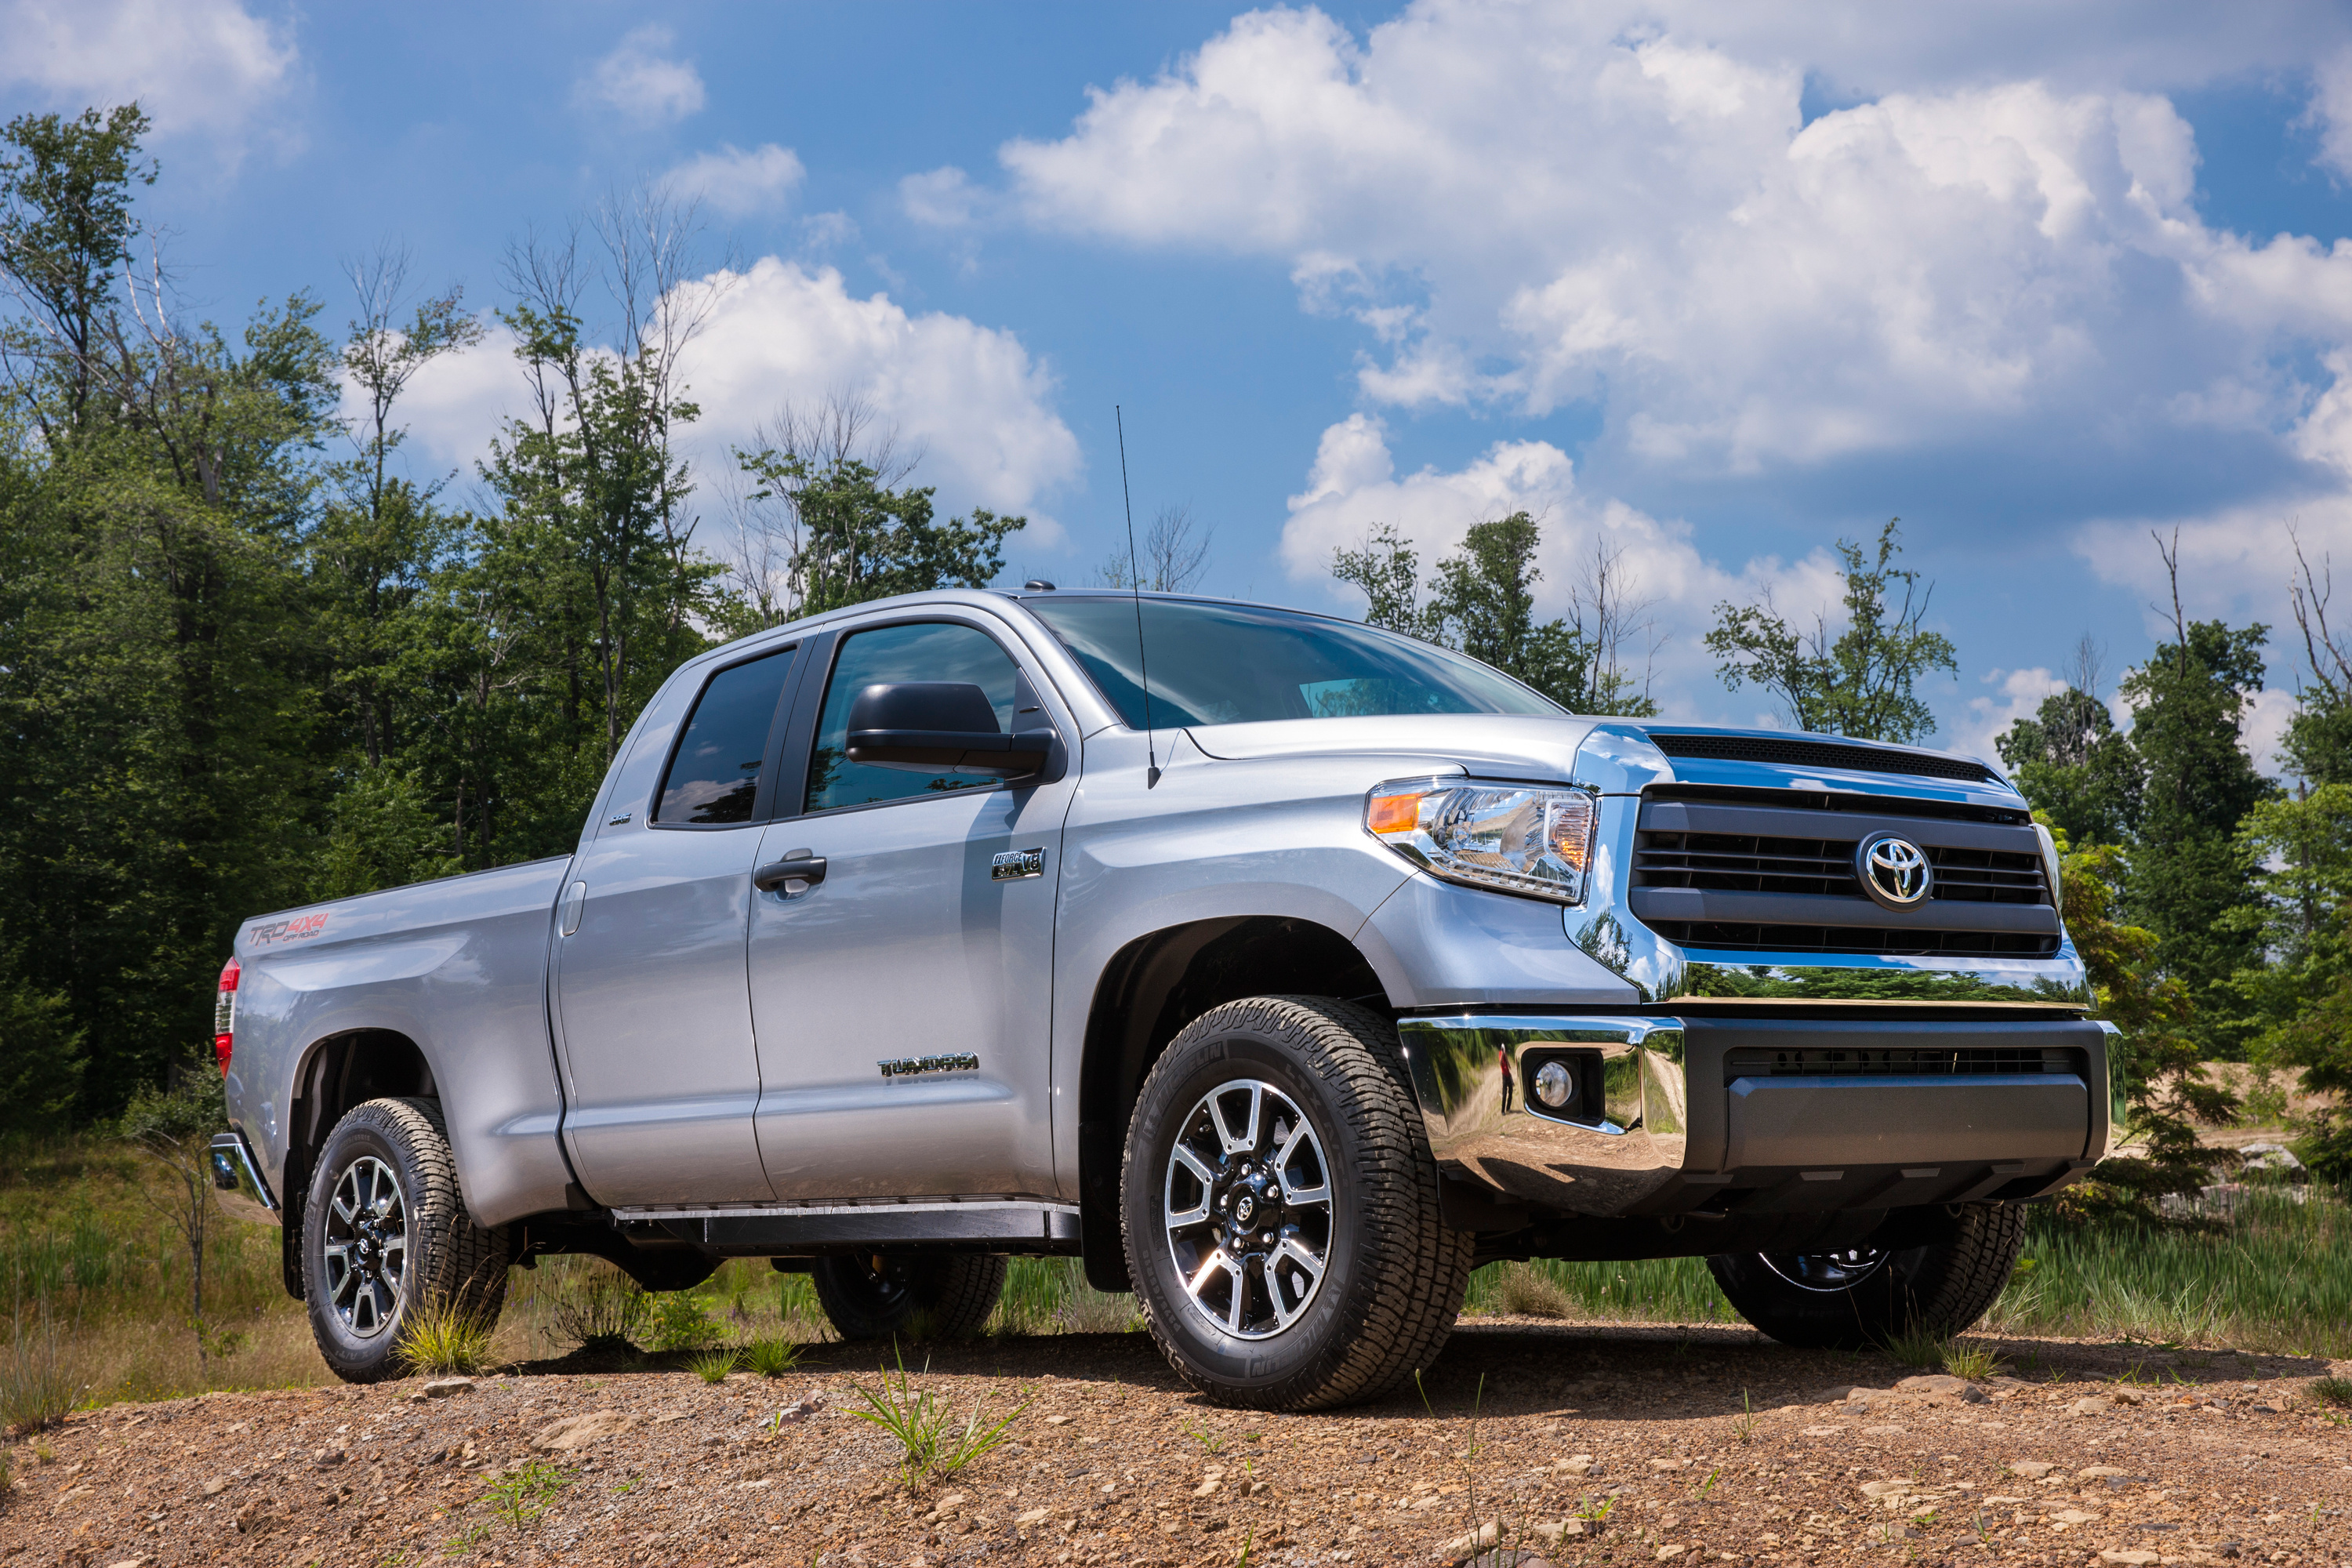 Toyota Tundra, 2015 truck legacy, Netcarshow image, Off-roading excellence, 3000x2000 HD Desktop